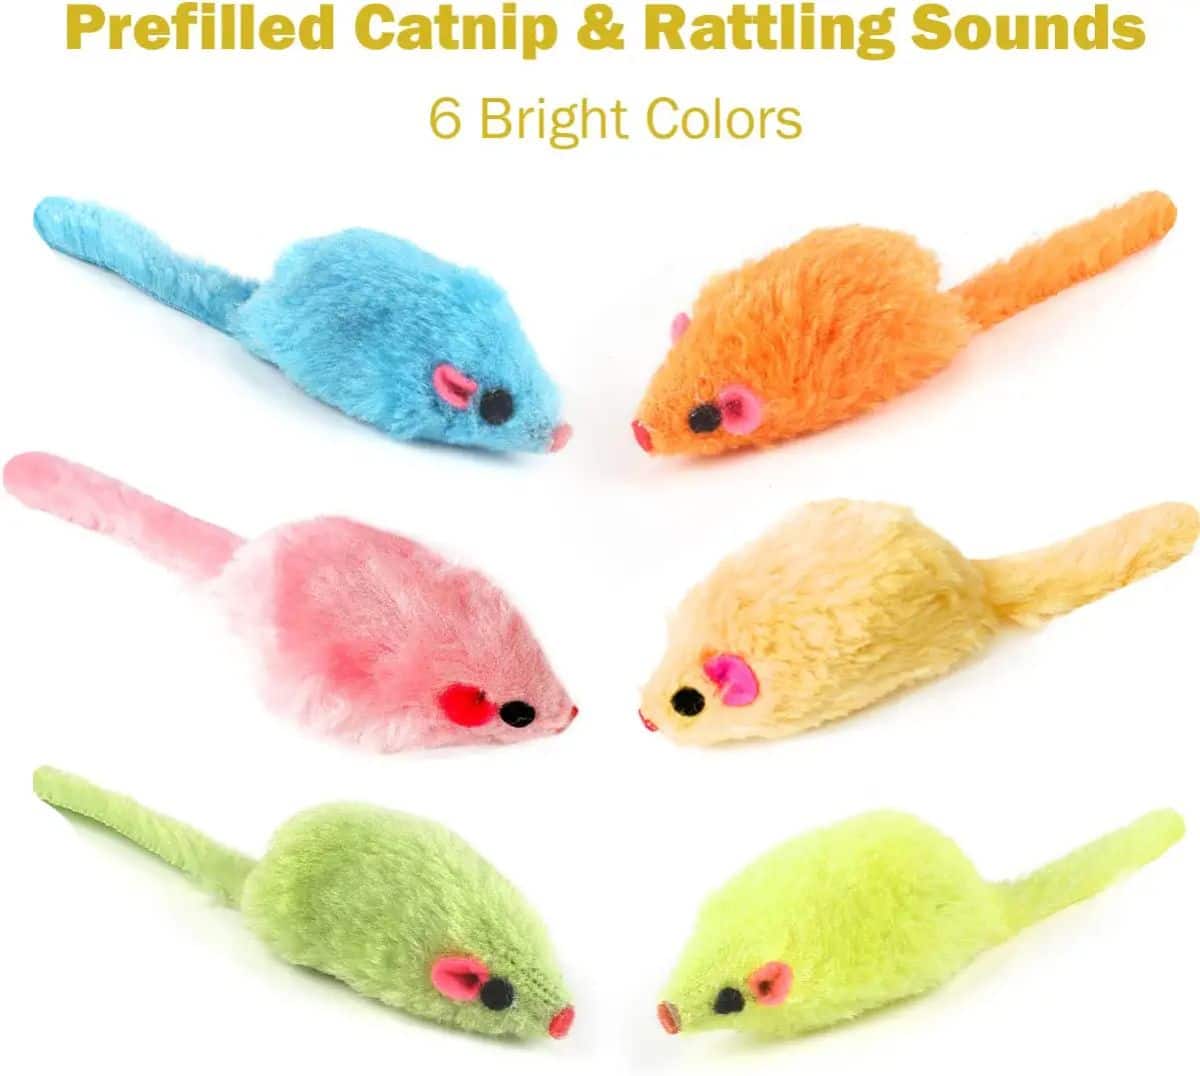 6 mouse cat toys.